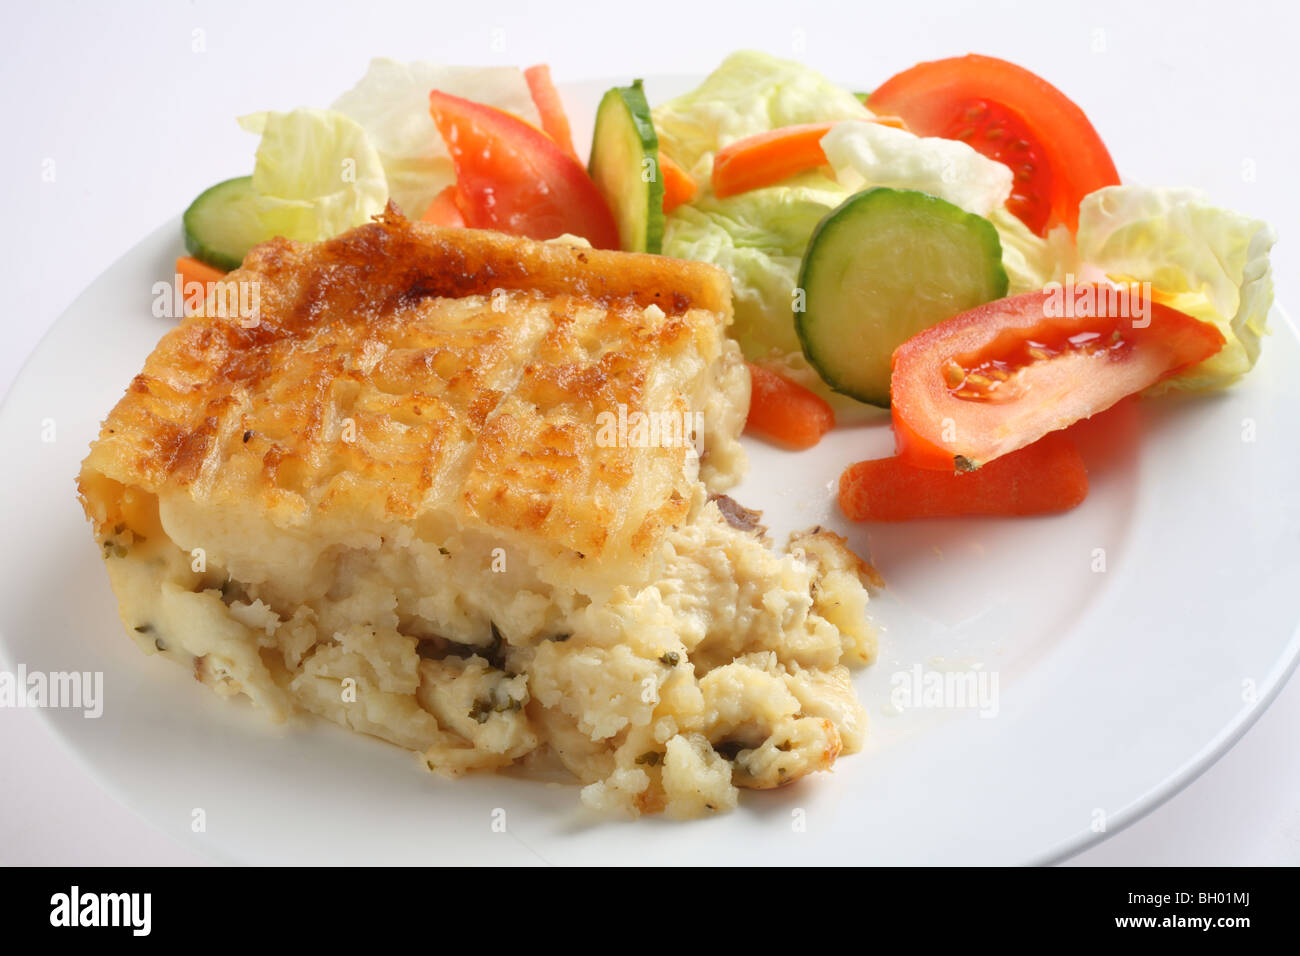 Traditional seafood pie, with fish in bechamel sauce topped with mashed potato and baked, served with a salad, side view Stock Photo